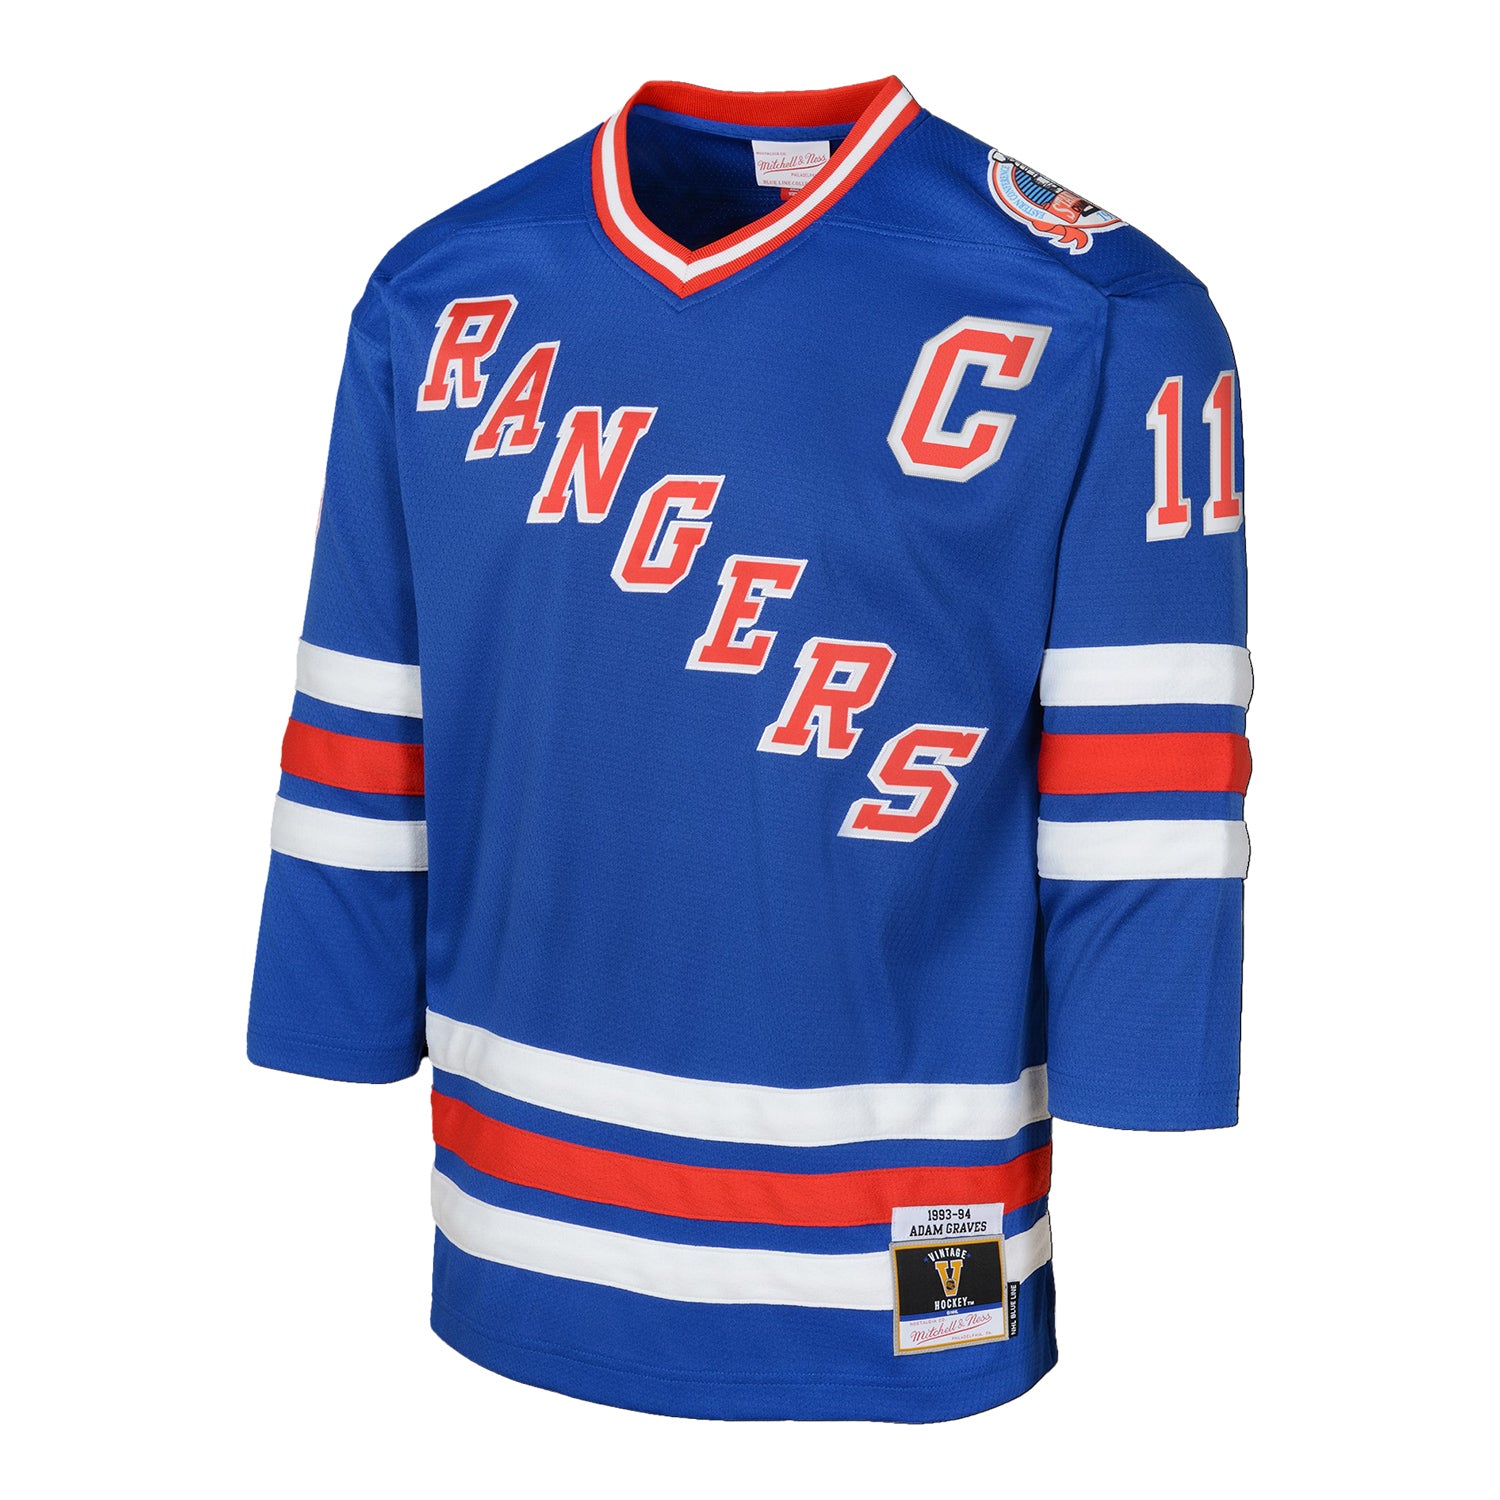 Youth Mark Messier Rangers Blue Line Jersey - Front View